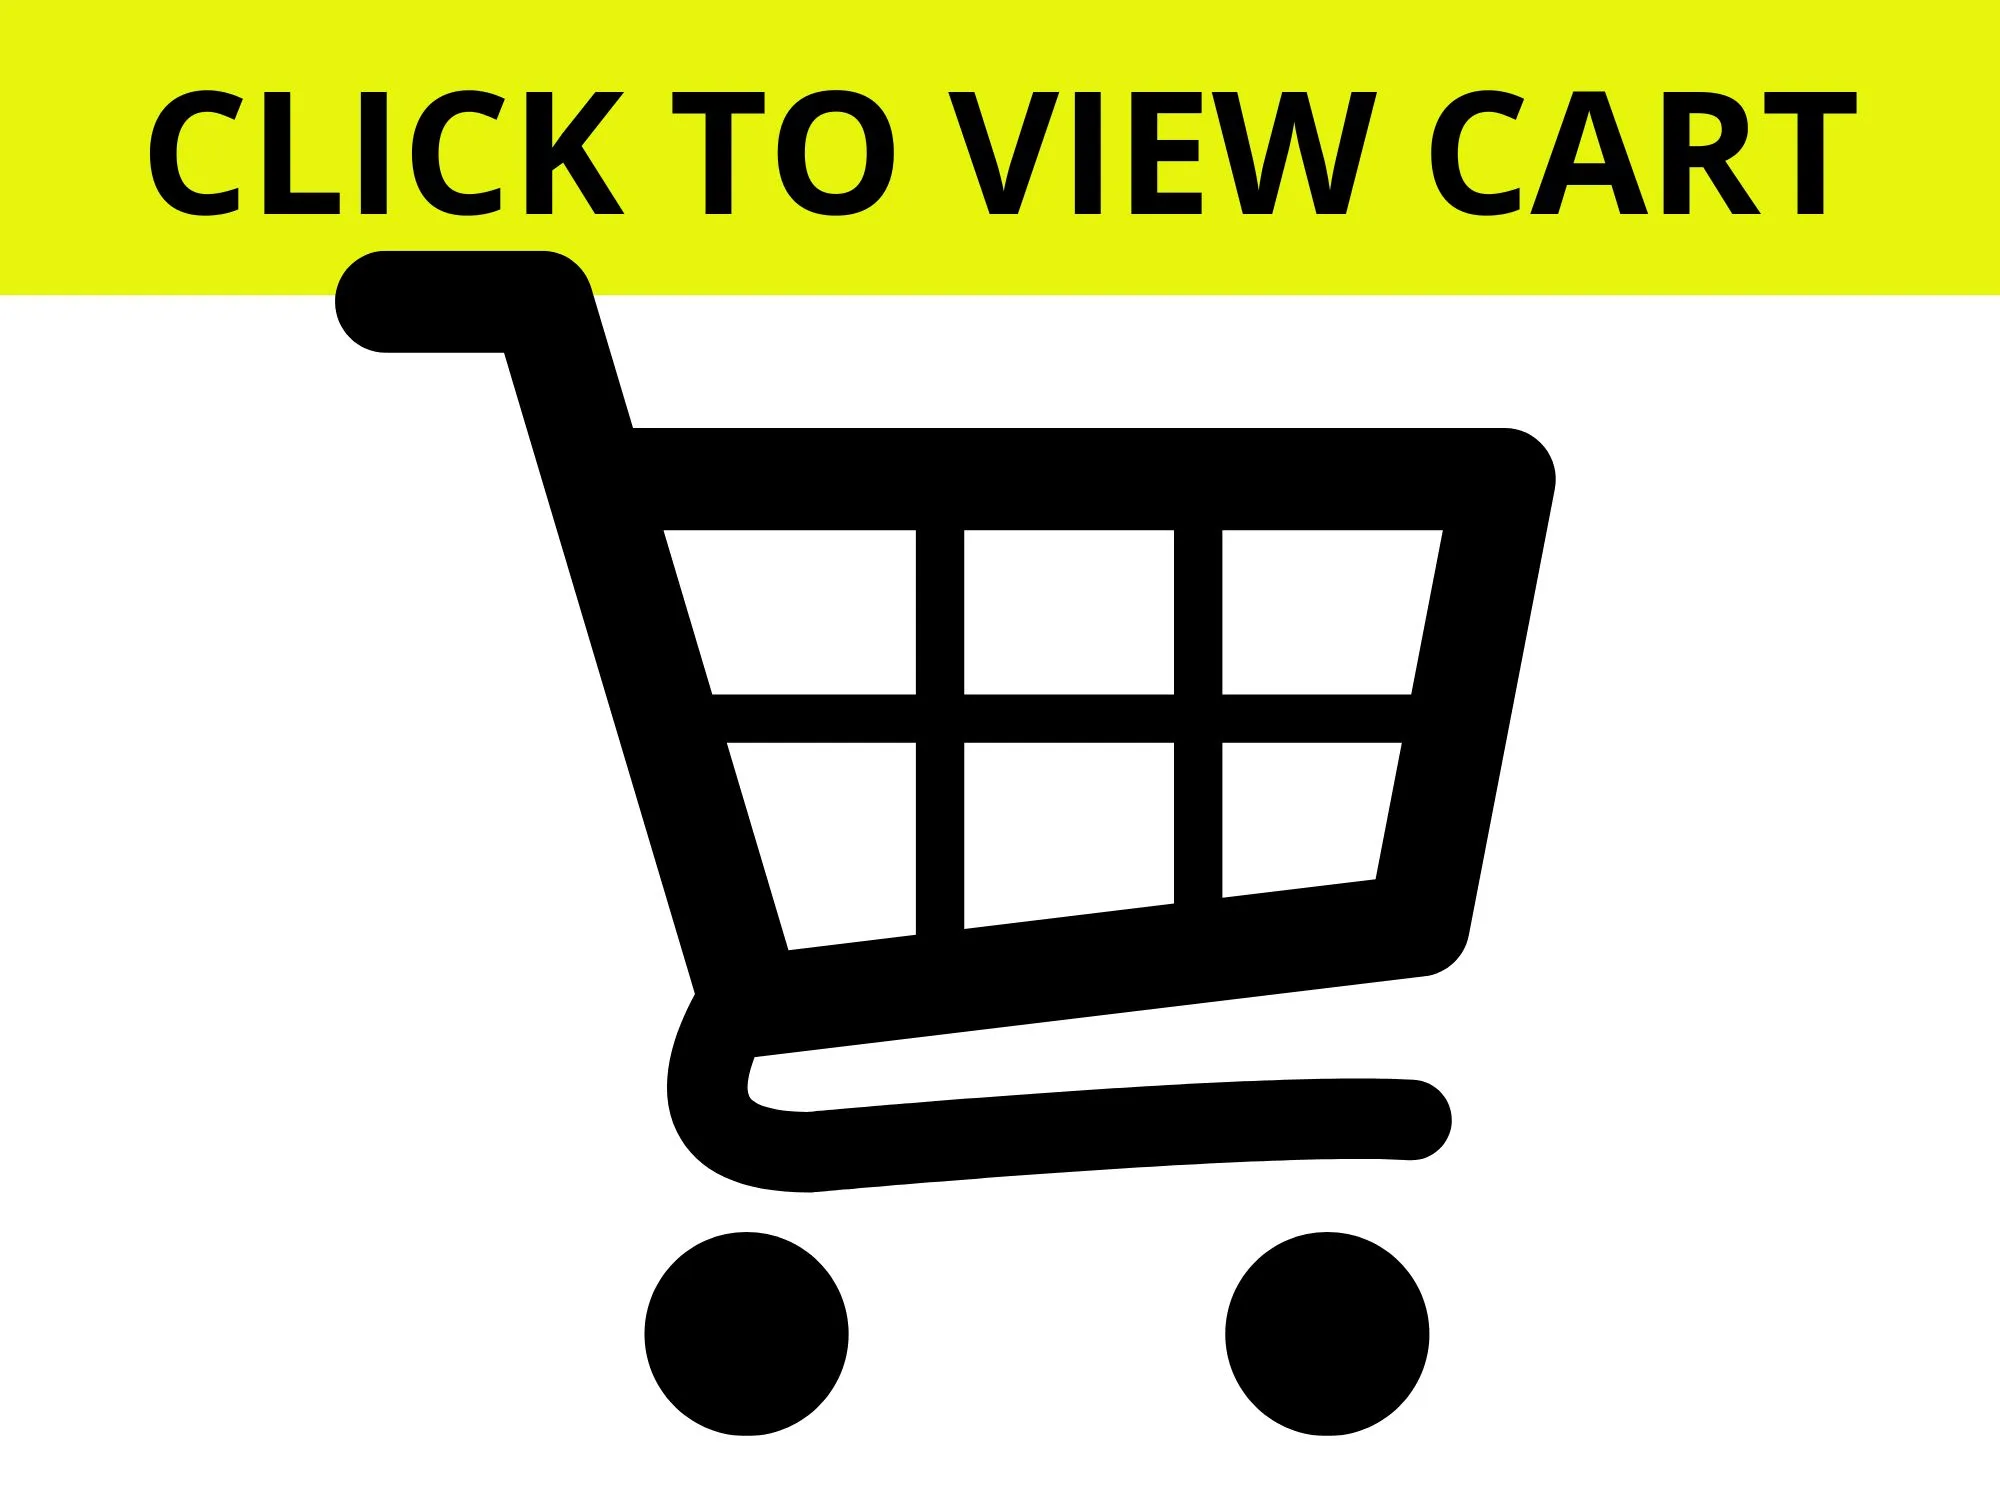 black and white cart, click image to view your total cart